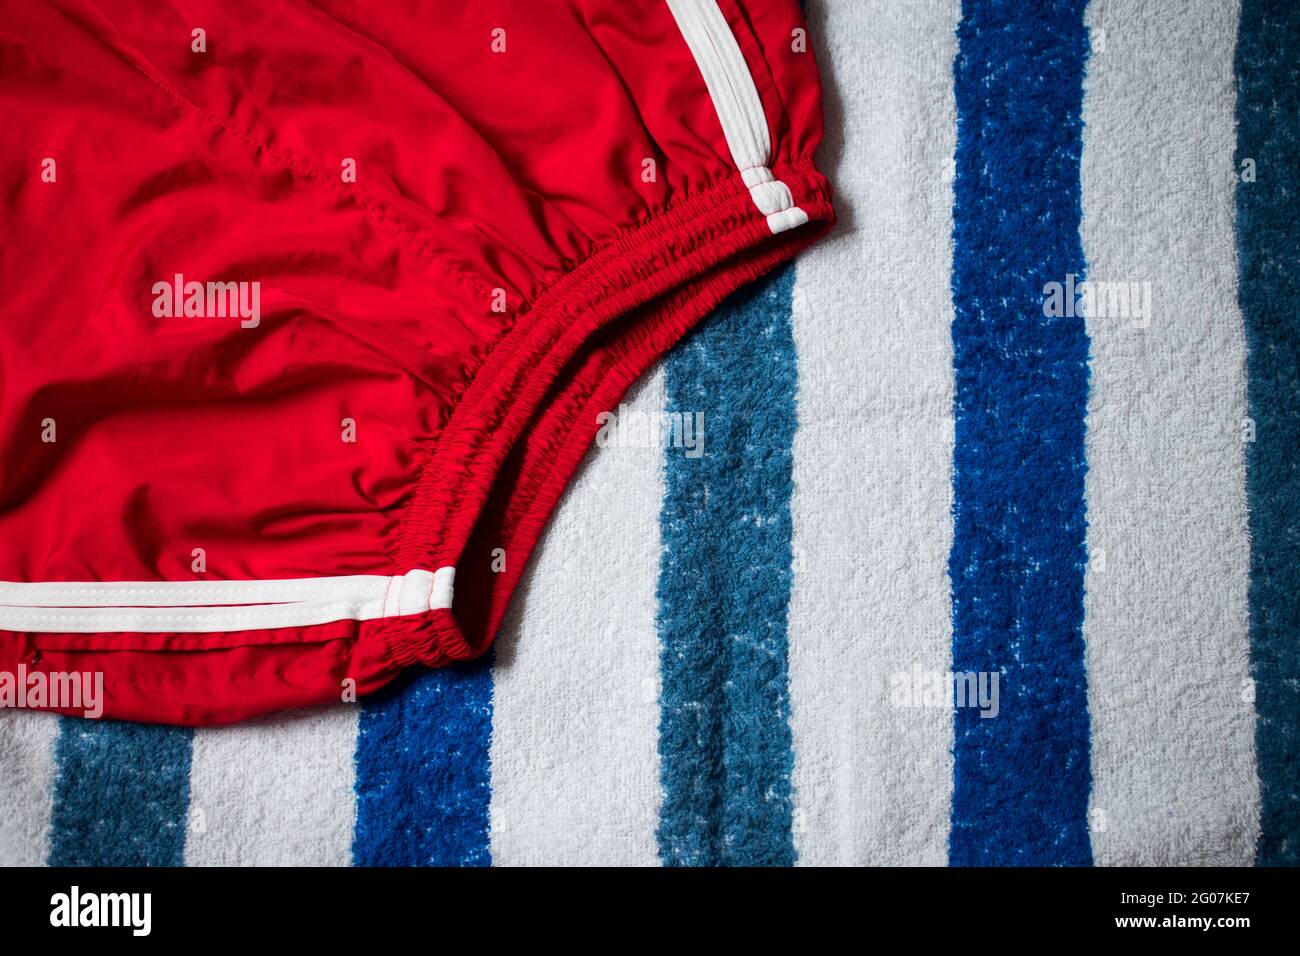 Red short pants on blue and white striped towel for summer Stock Photo